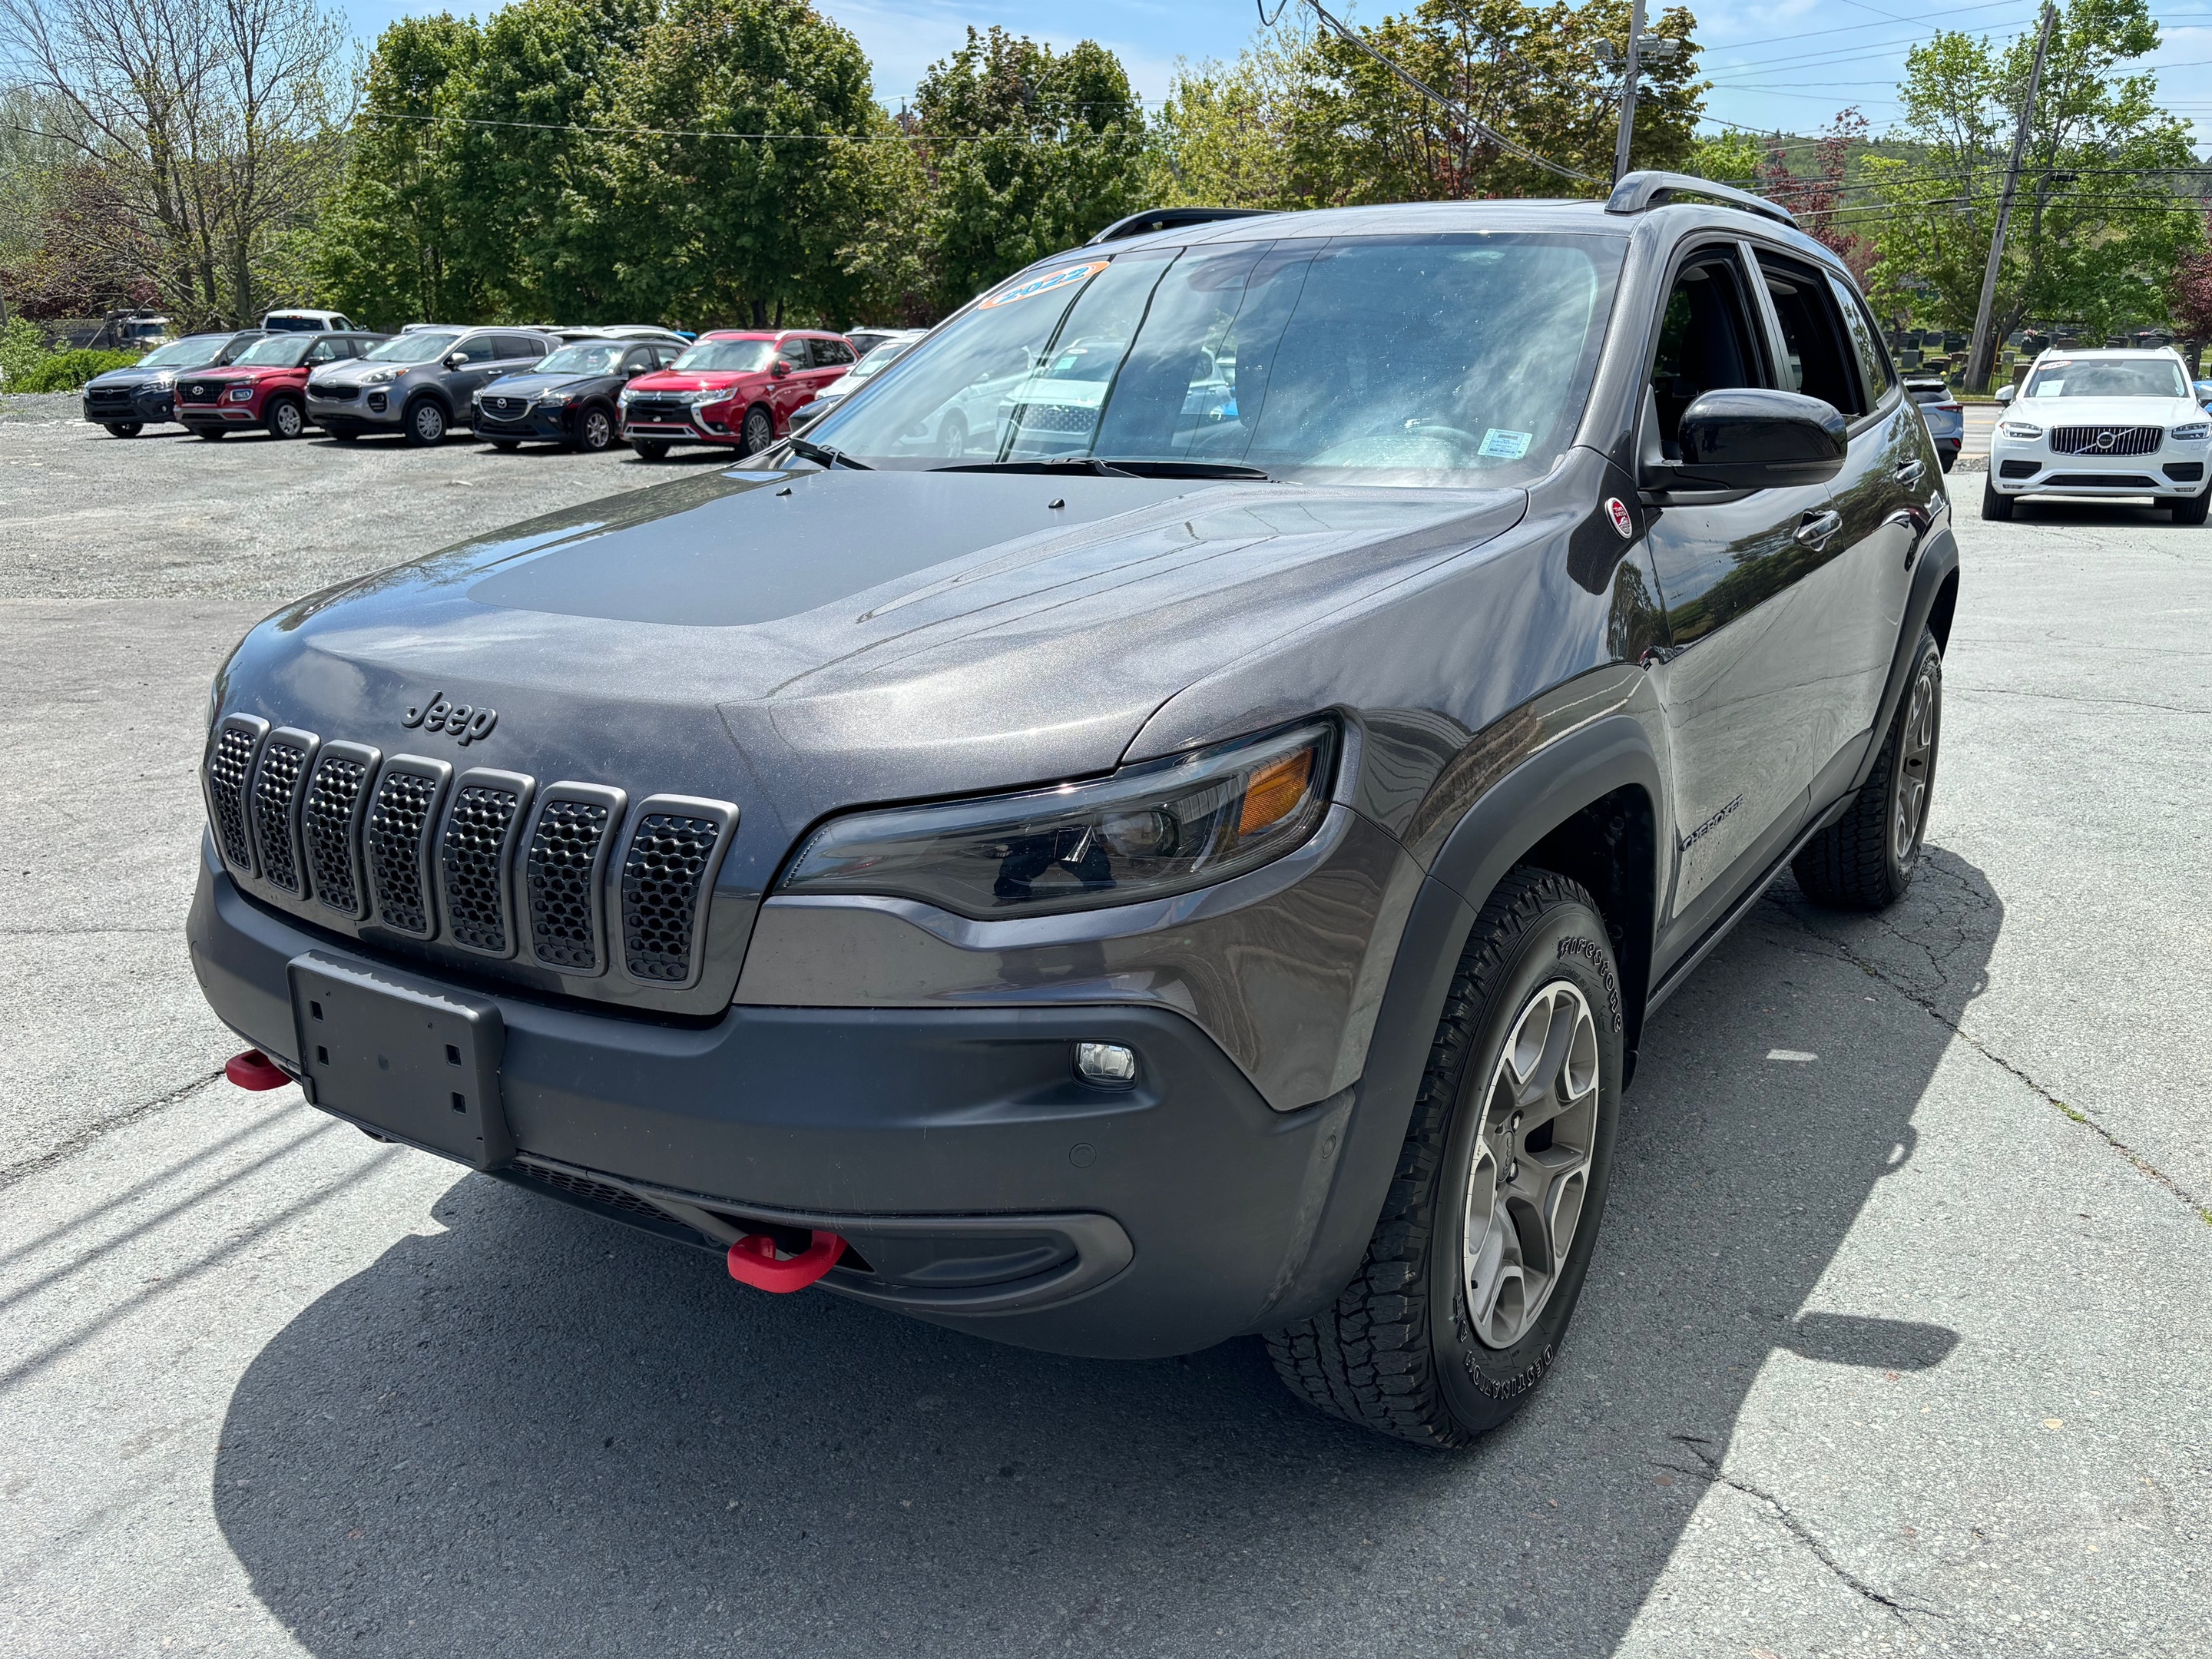 2022 Jeep Cherokee Trailhawk TRAILHAWK (TRAIL RATED) EDITION 4 WHEEL 